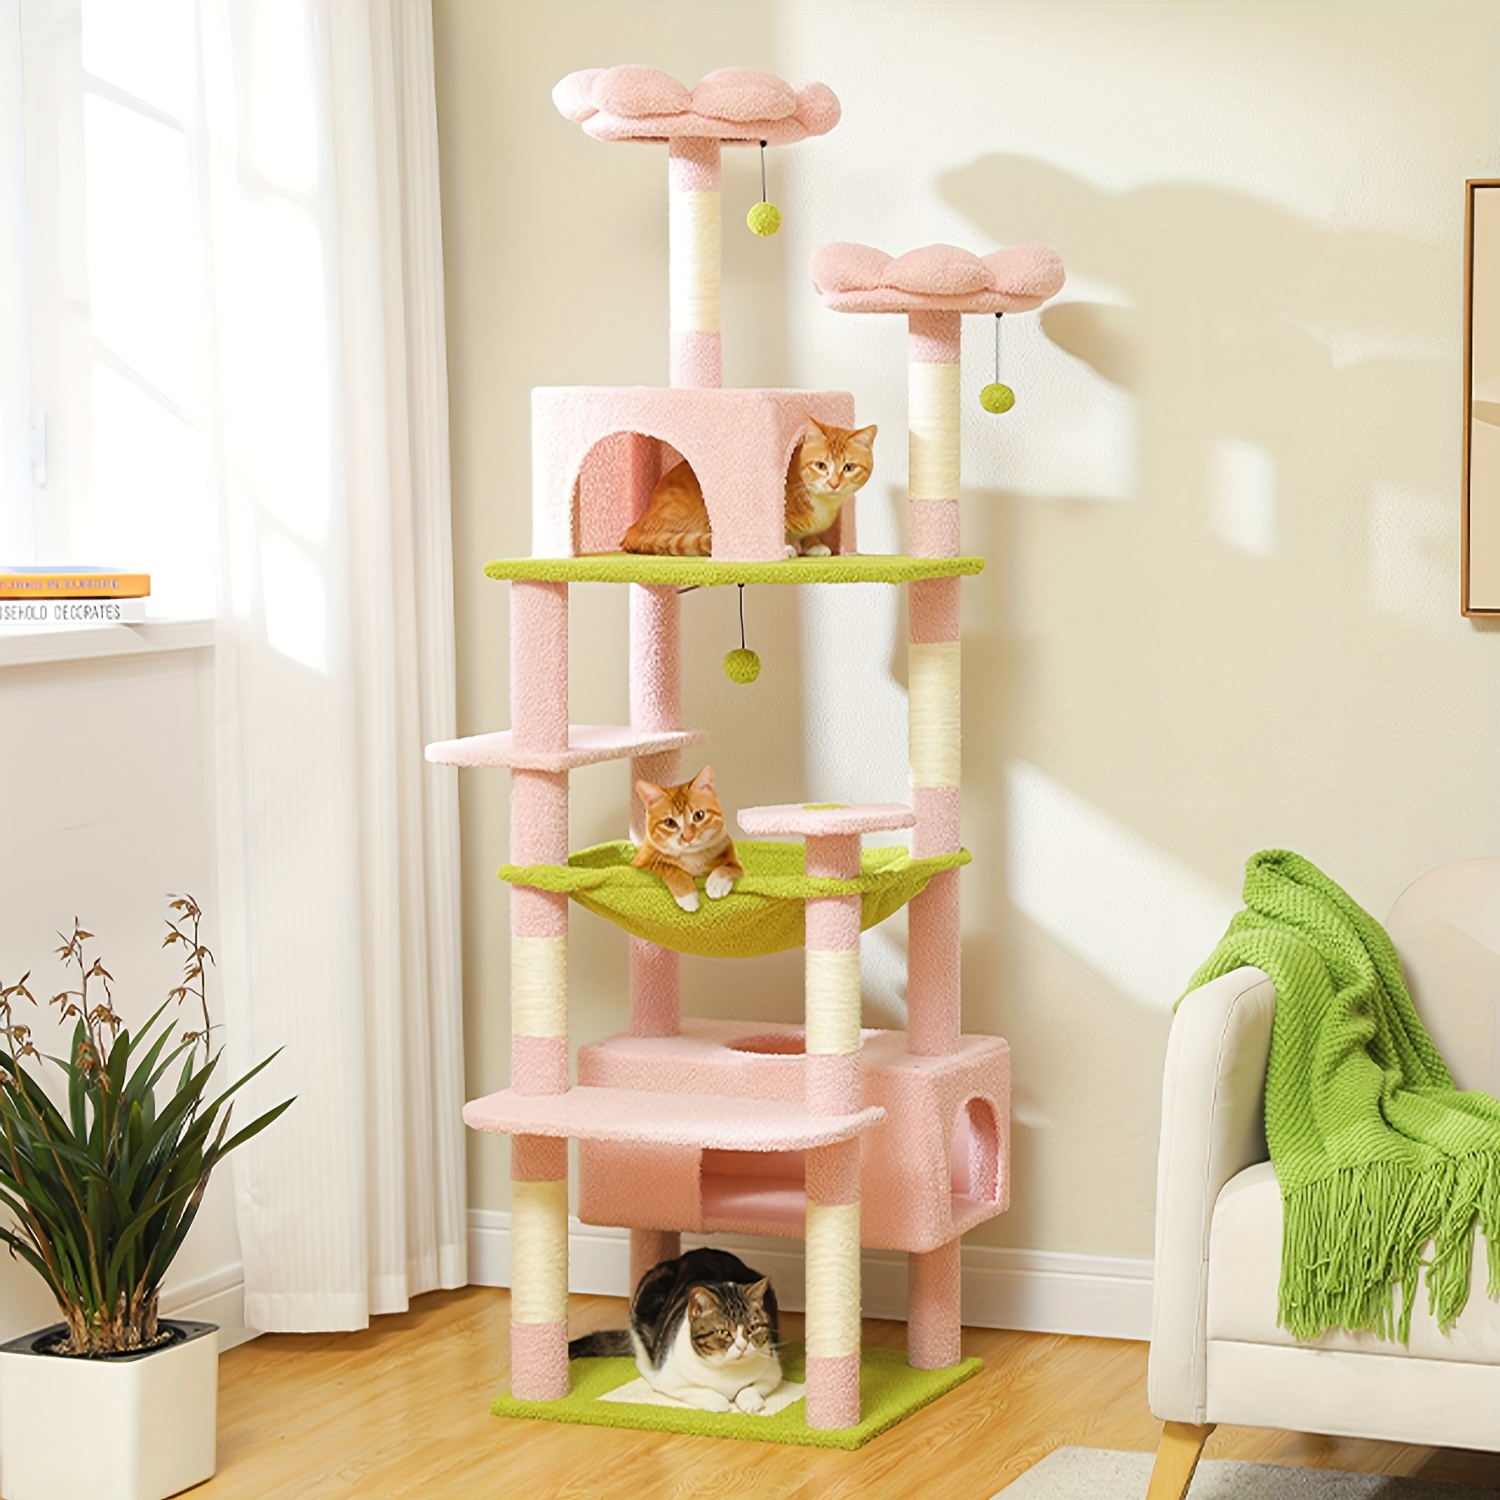 

Multi-level 72.4" Tall Cat Tree Tower With Sisal-covered Scratching Posts, 2 Condos, Hammock & 2 Plush Balls, Pink And Green Indoor Playhouse For Cats